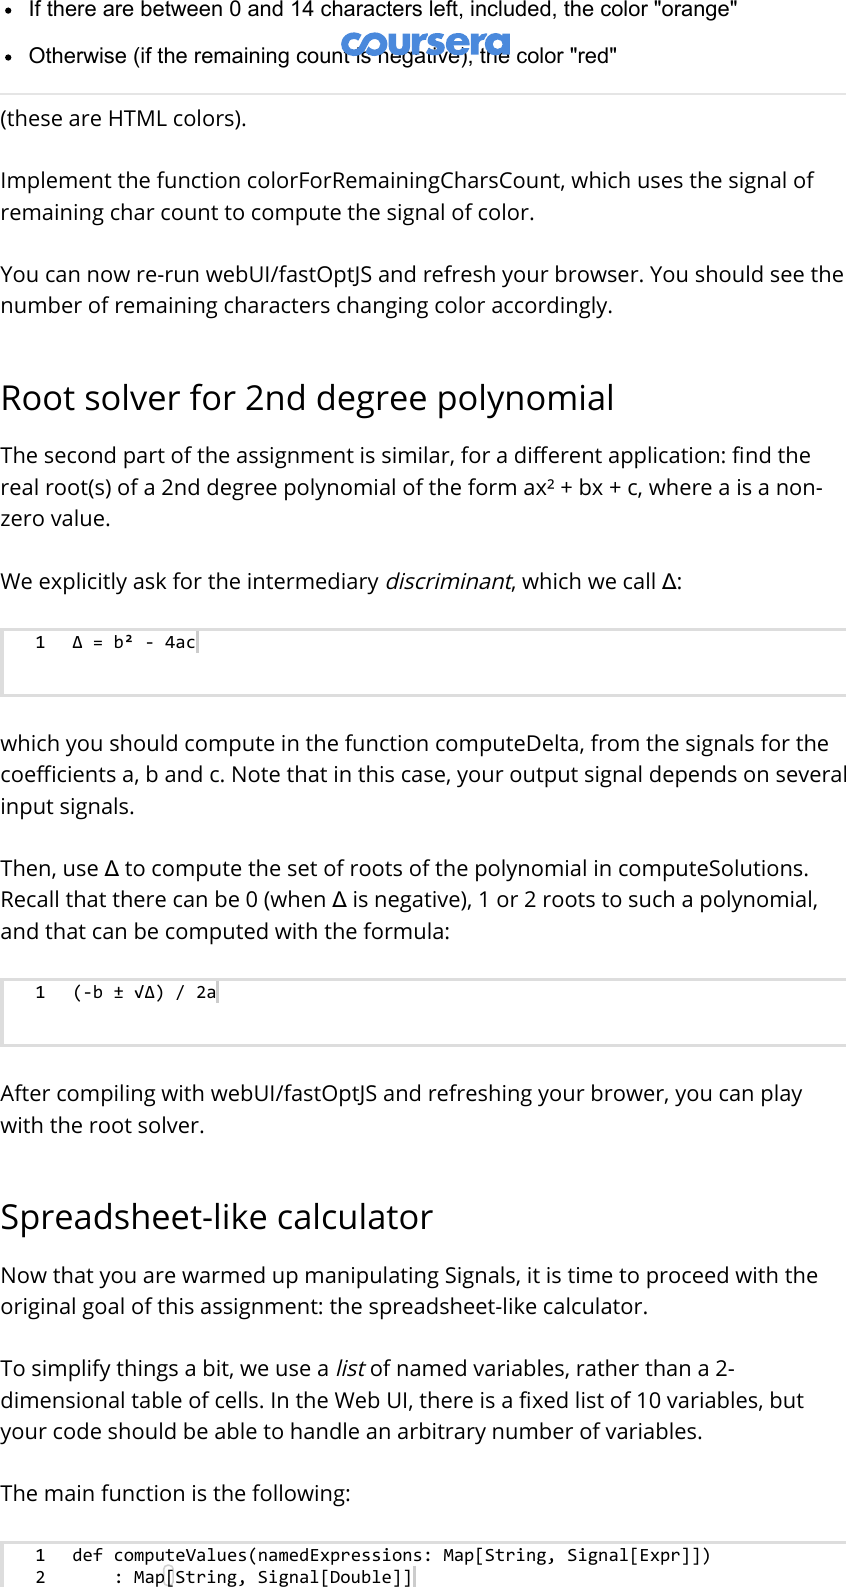 Page 3 of 5 - Instructions-Calculator